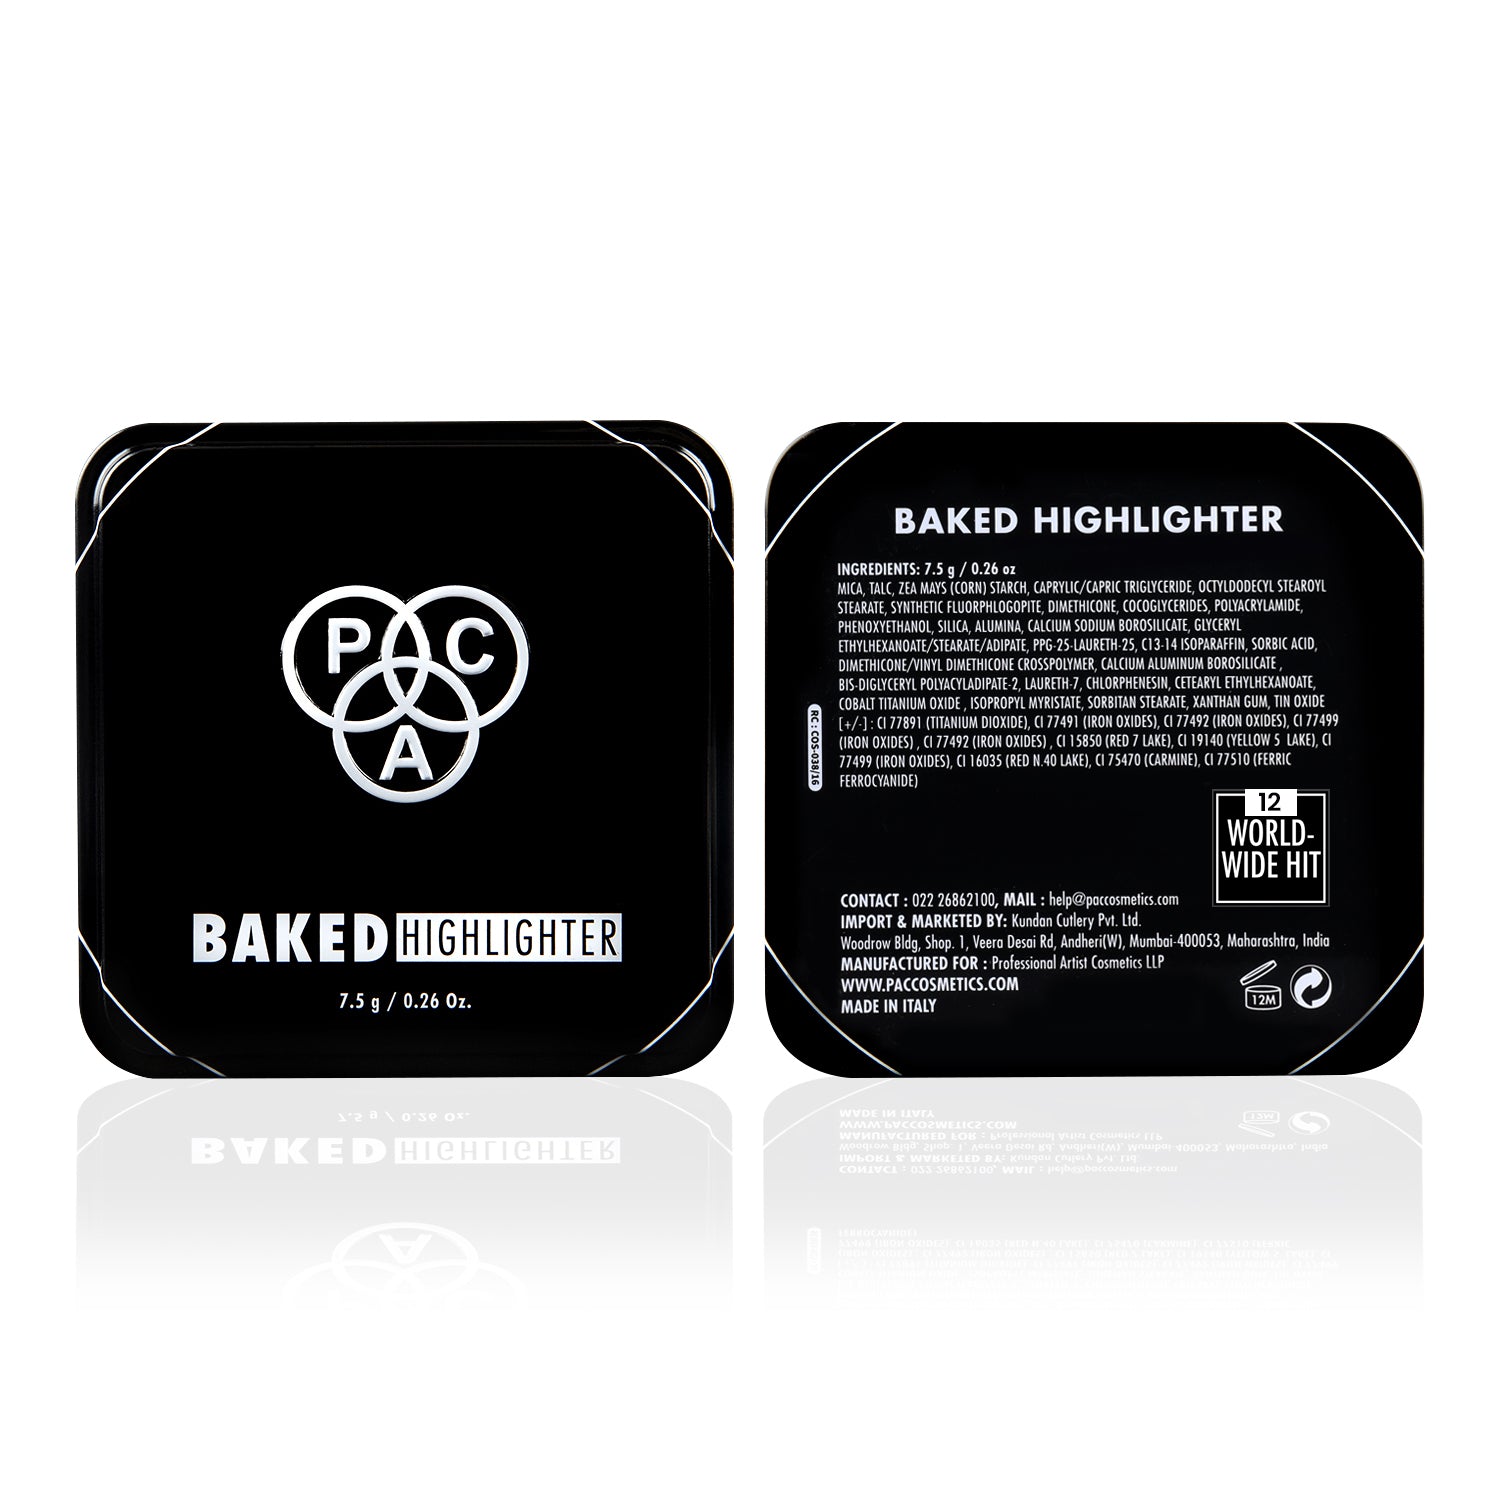 PAC Cosmetics Baked Highlighter #Size_7.5 gm+#Color_Worldwide Hit